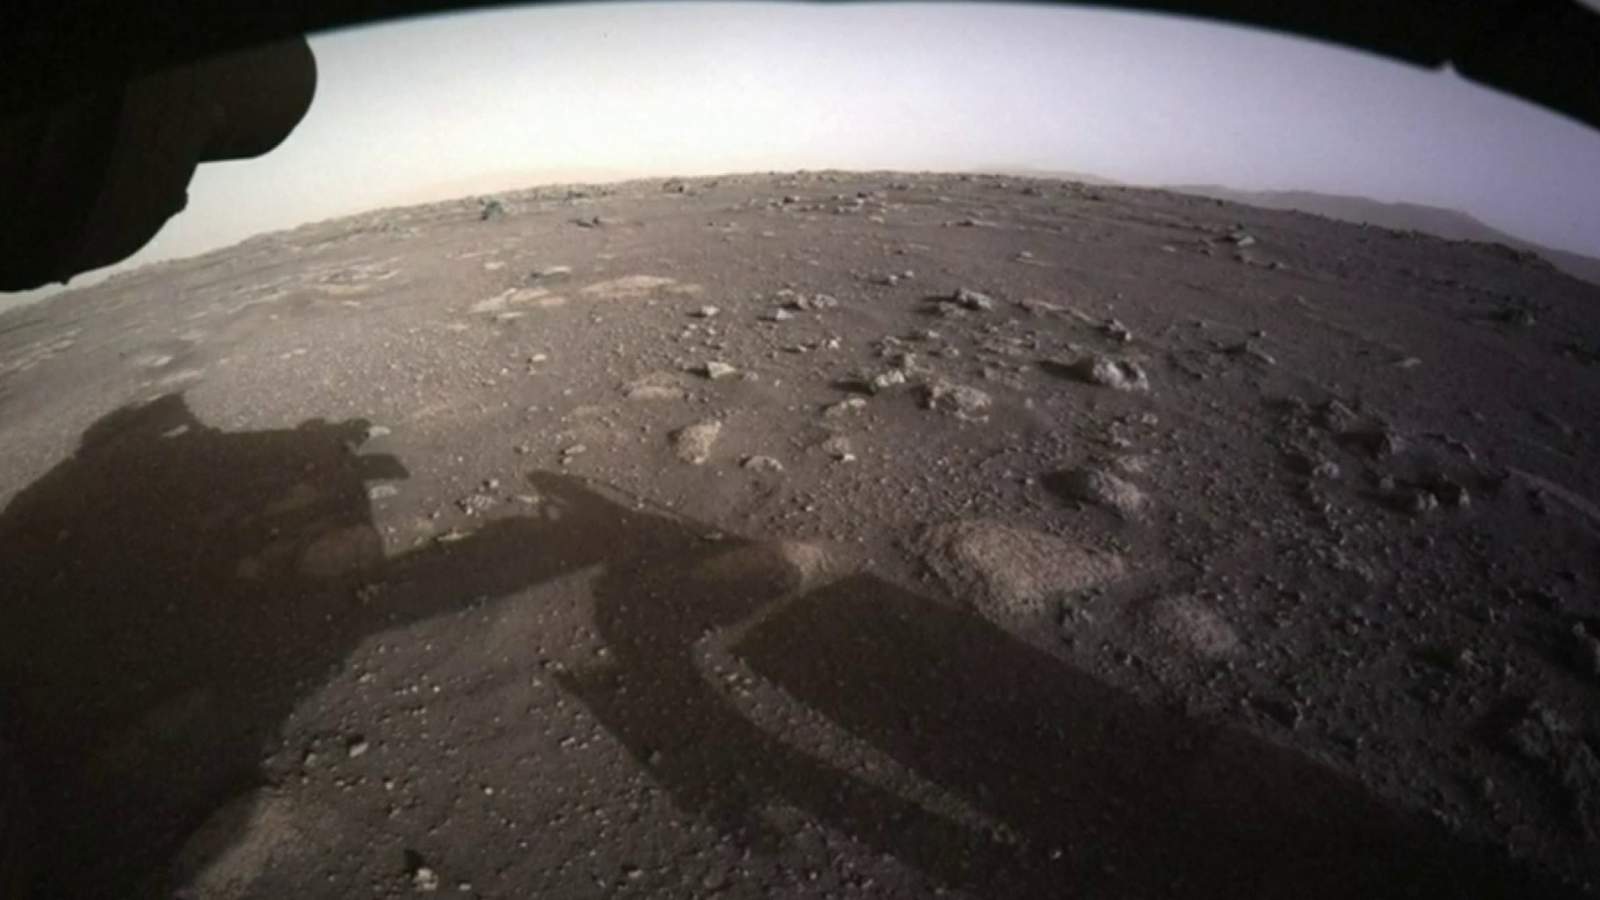 Check out the new images from NASA’s Perseverance rover on Mars